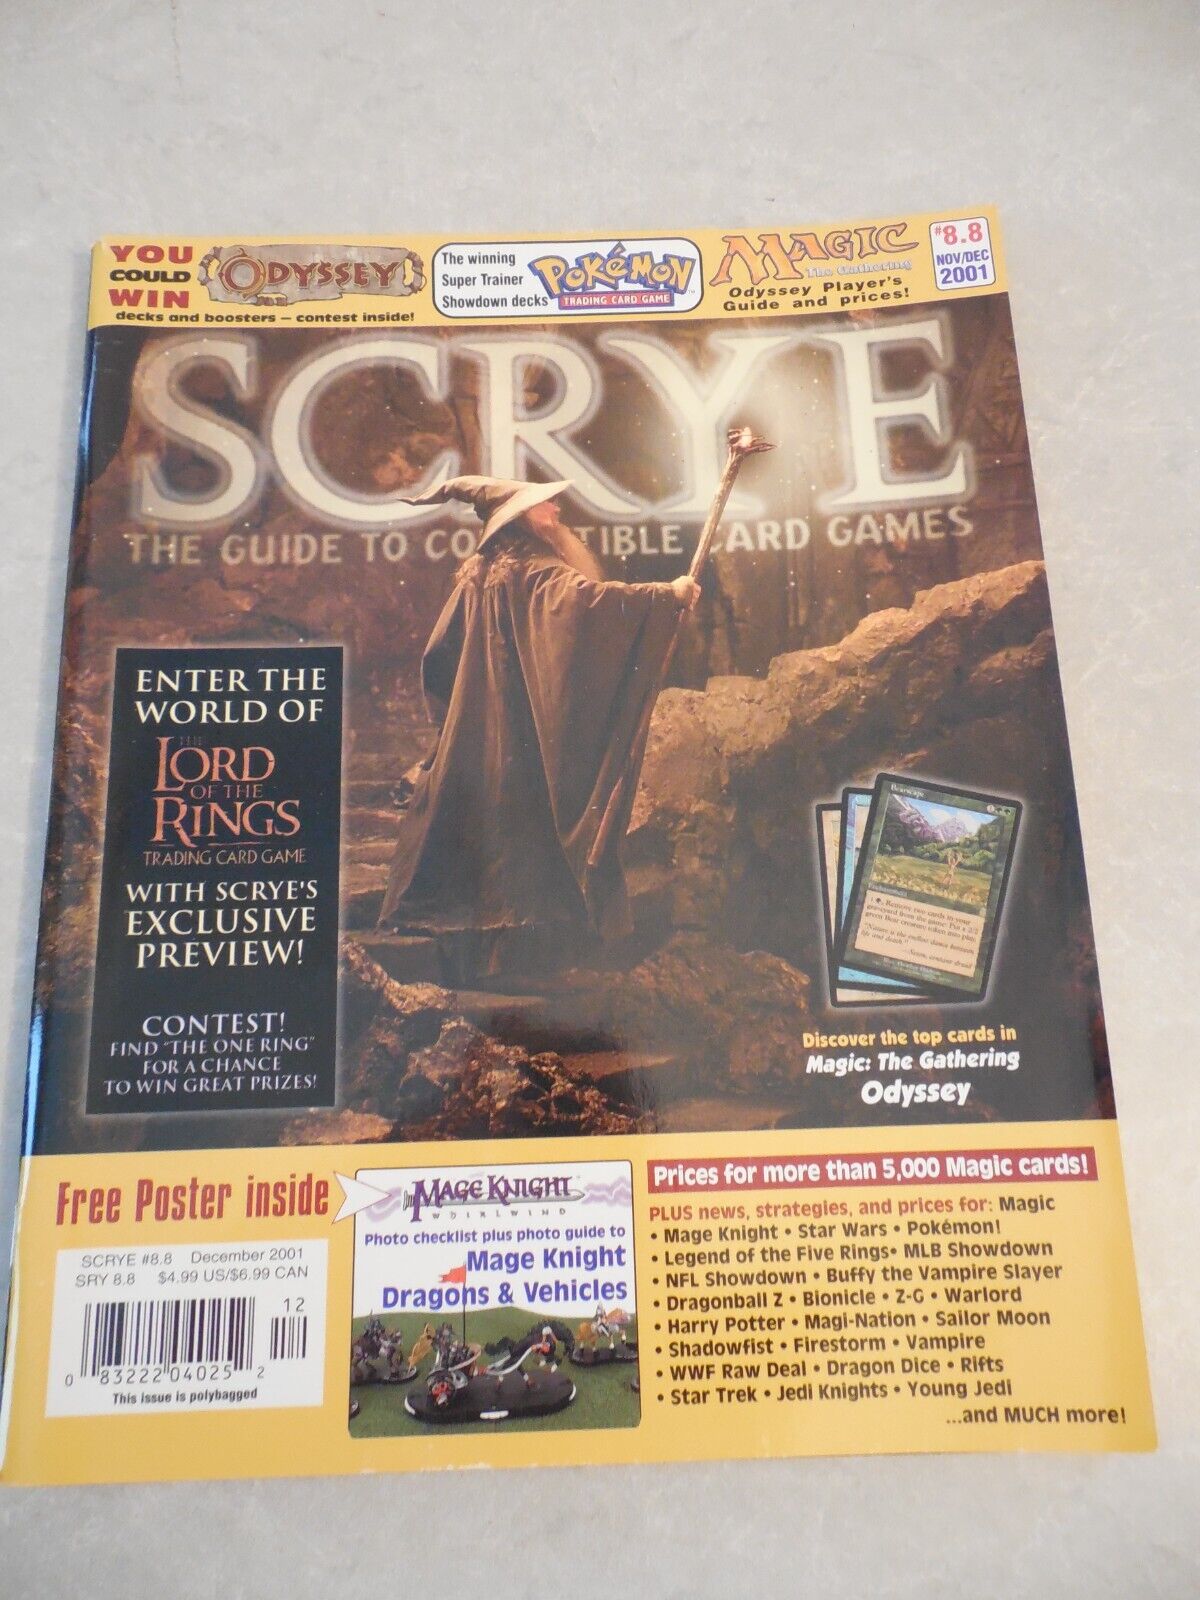 SCRYE Magazine #8.8, NOVEMBER/DECEMBER 2001, WITH MAGE KNIGHT CHECKLIST POSTER